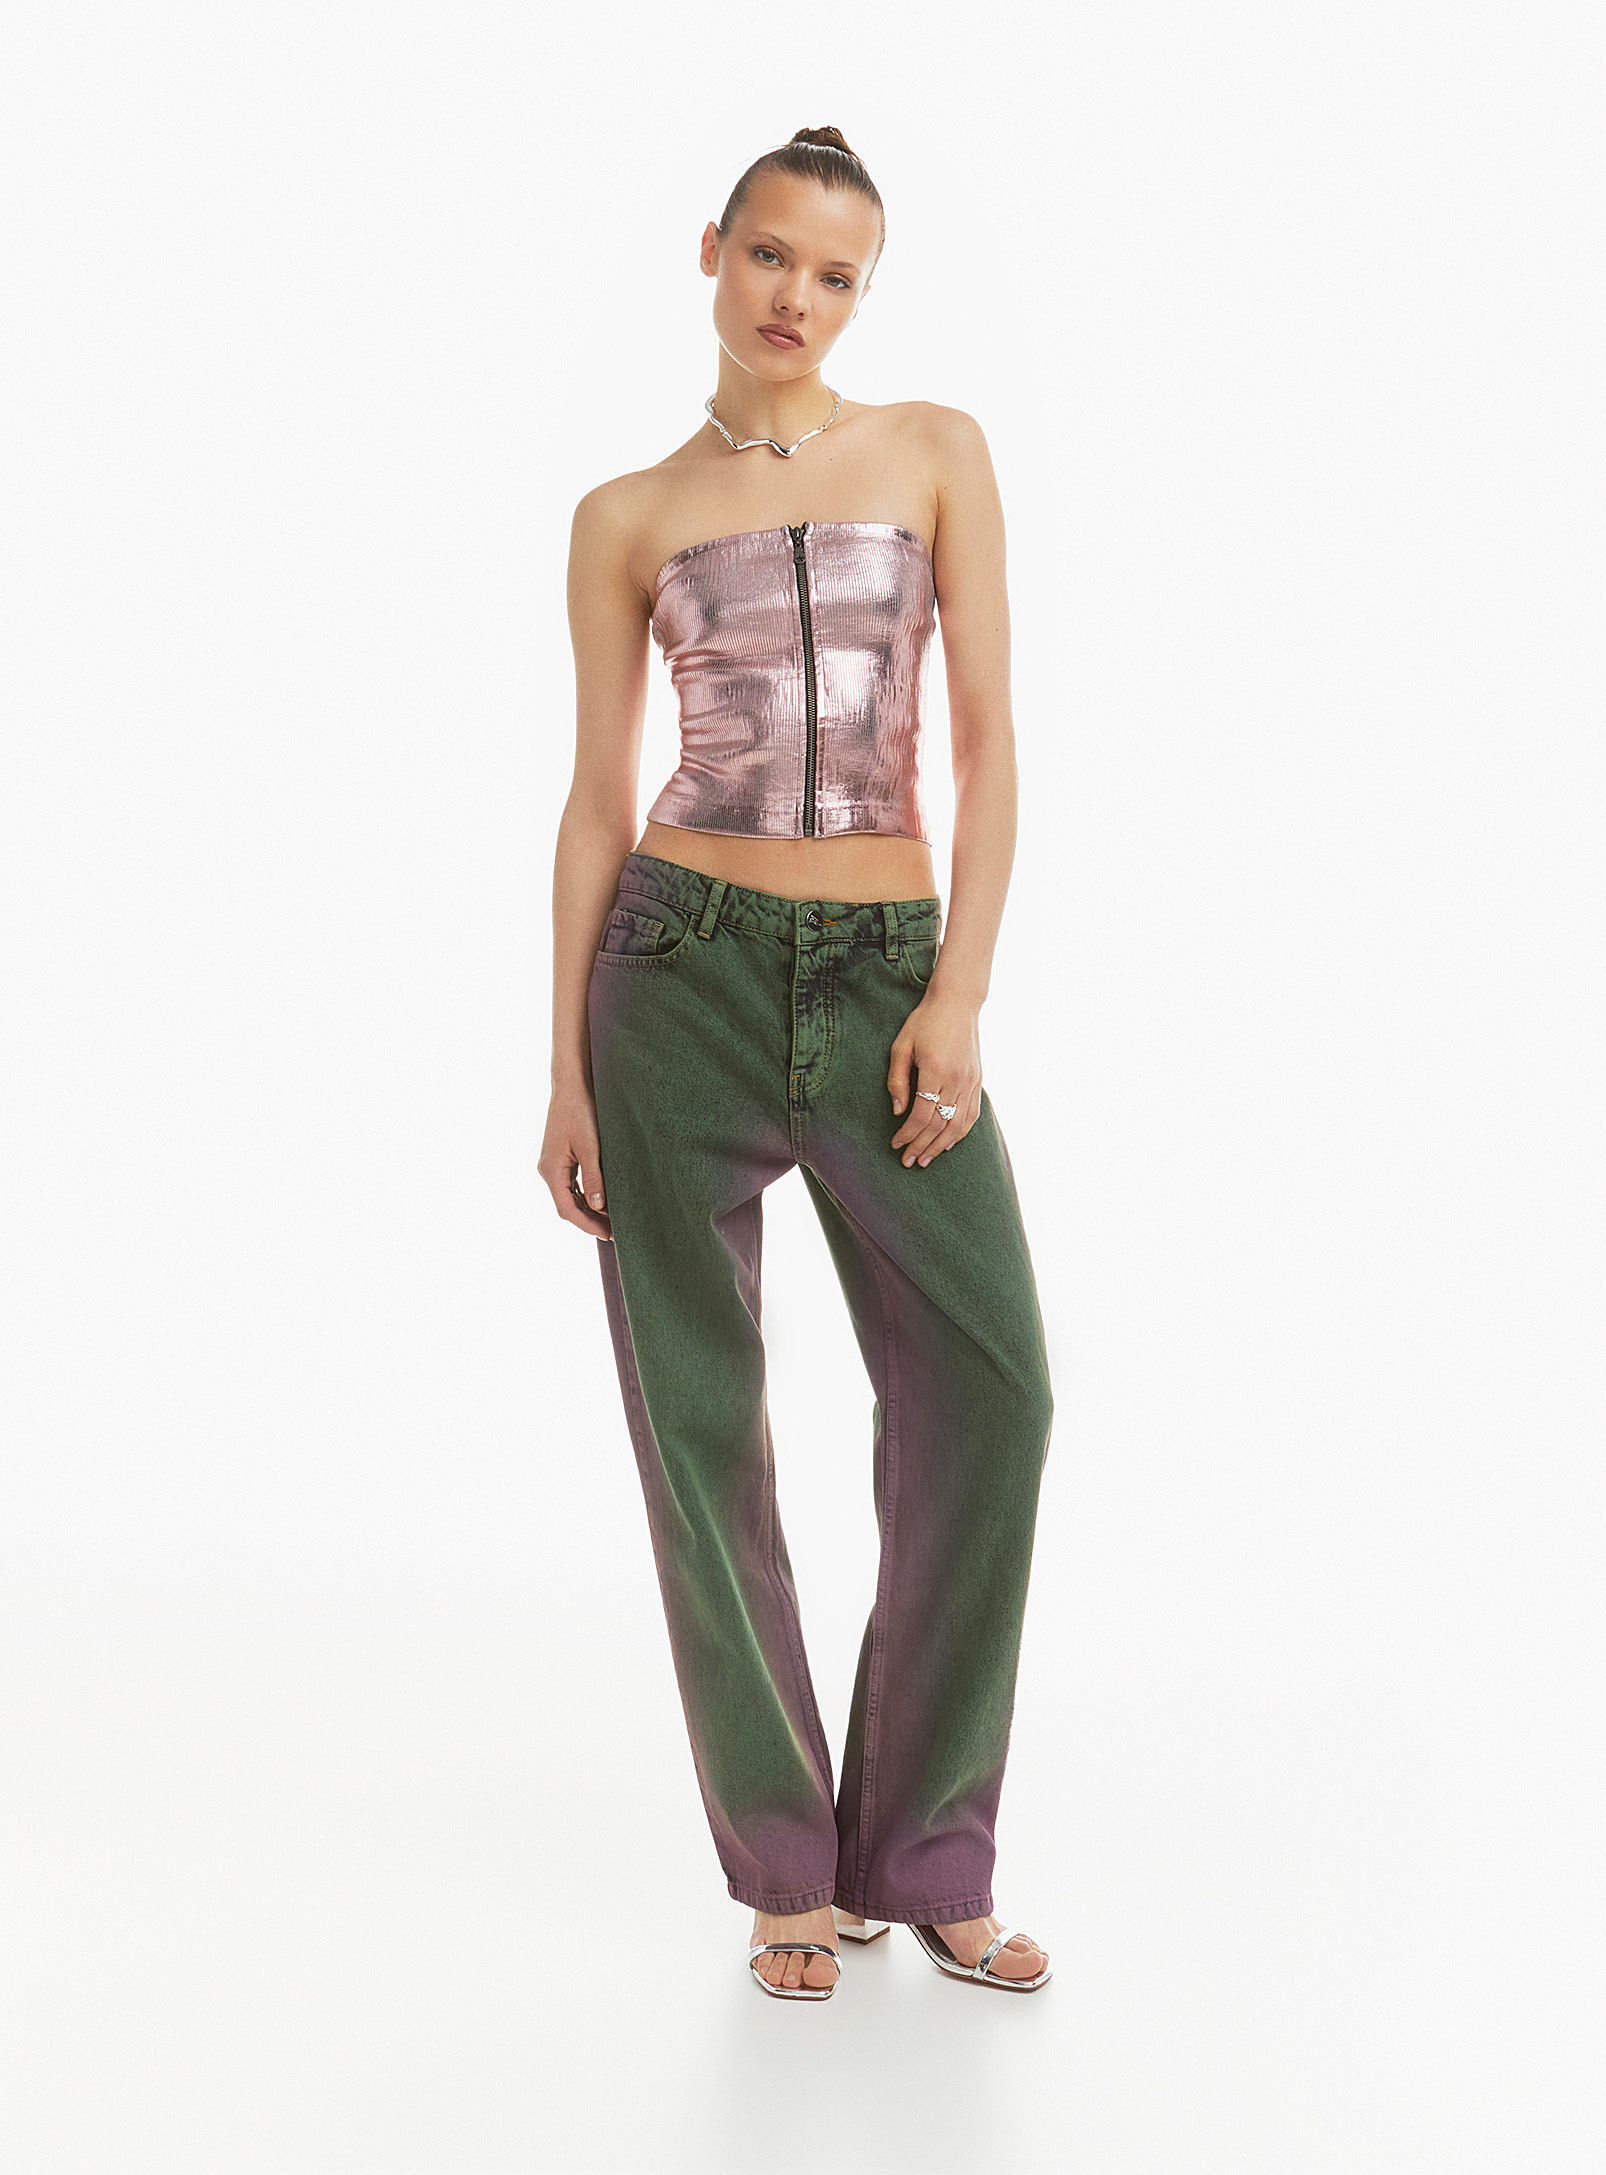 Basic Pleasure Mode - Women's Faded pink and green straight-leg jean